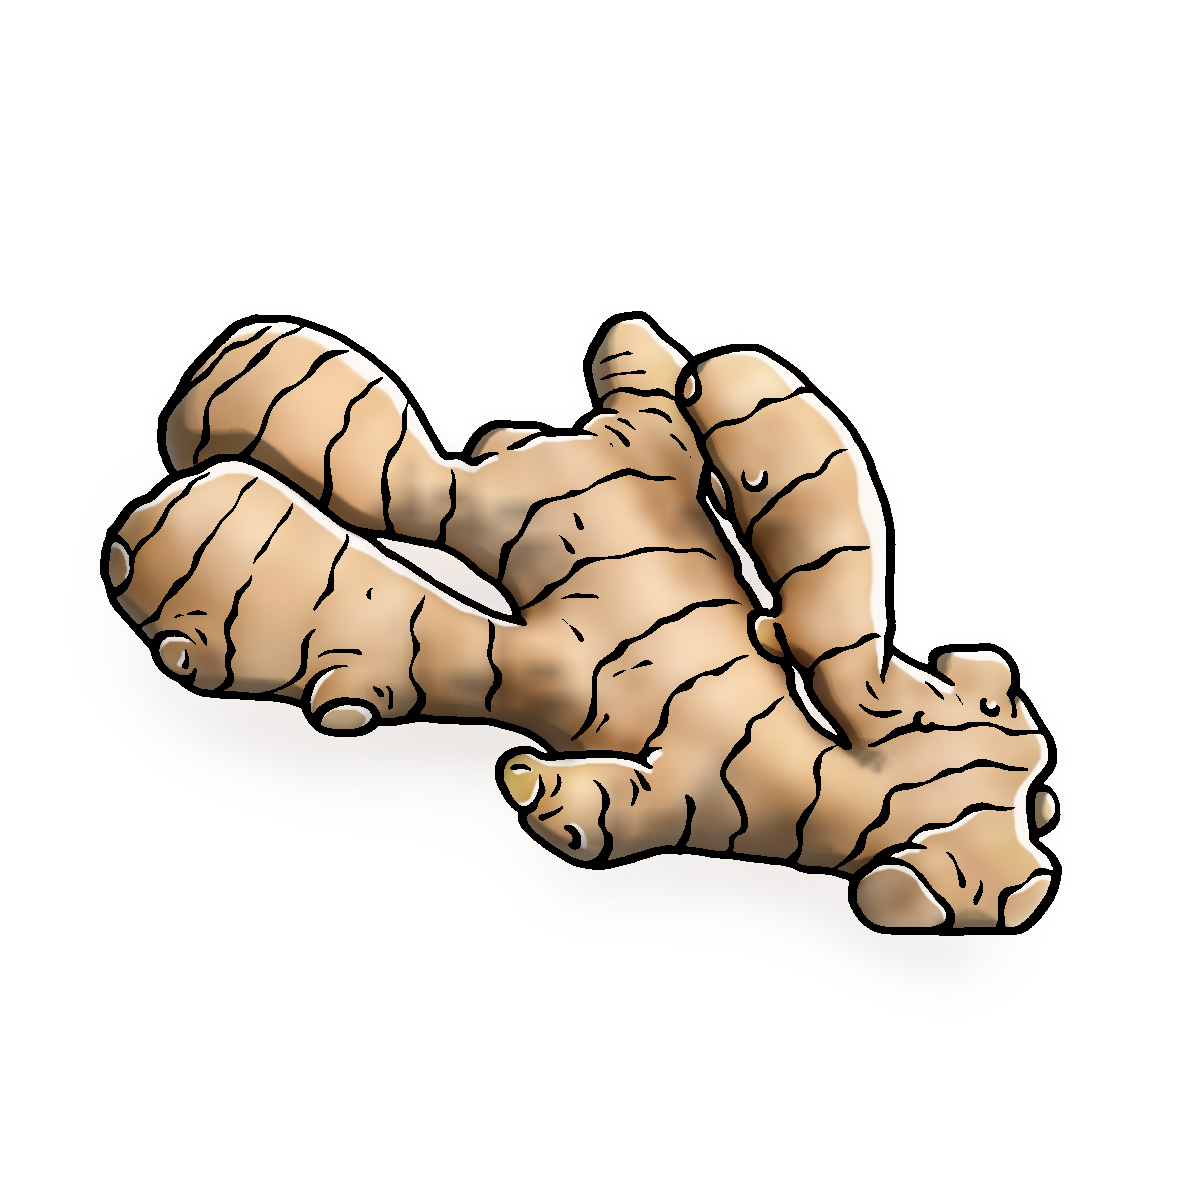 ginger illustration clipart drawing picture